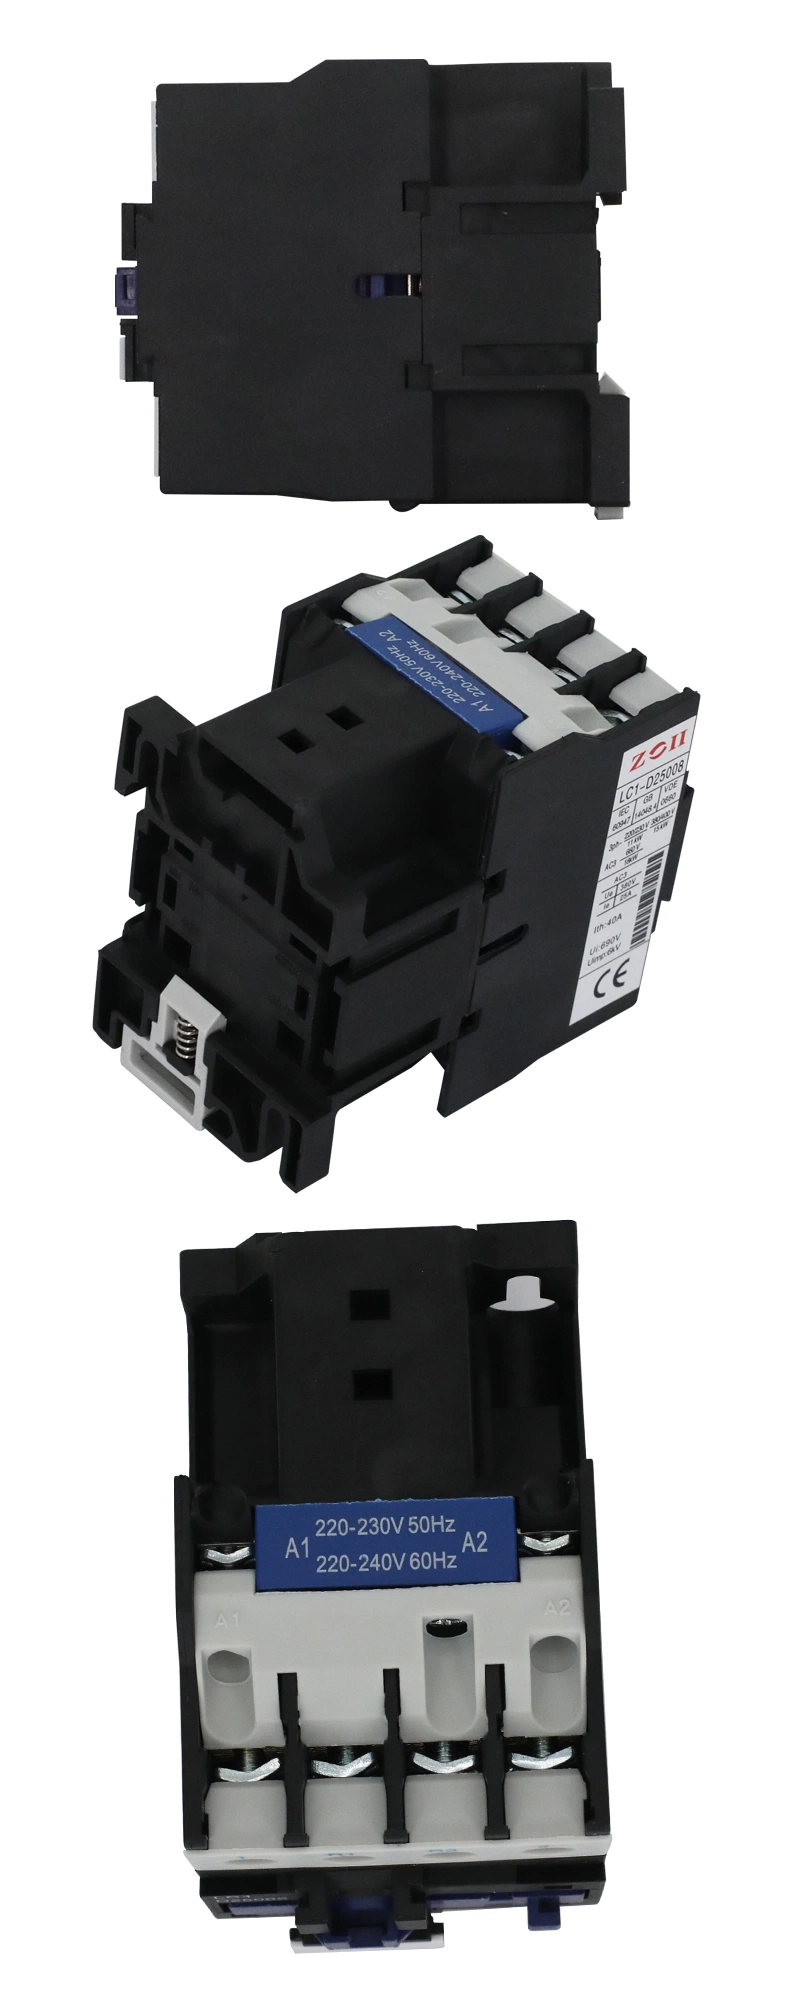 High Quality Electrical 3 Phase 3 Pole AC Contactor LC1 Magnetic Contactor 1no+1nc